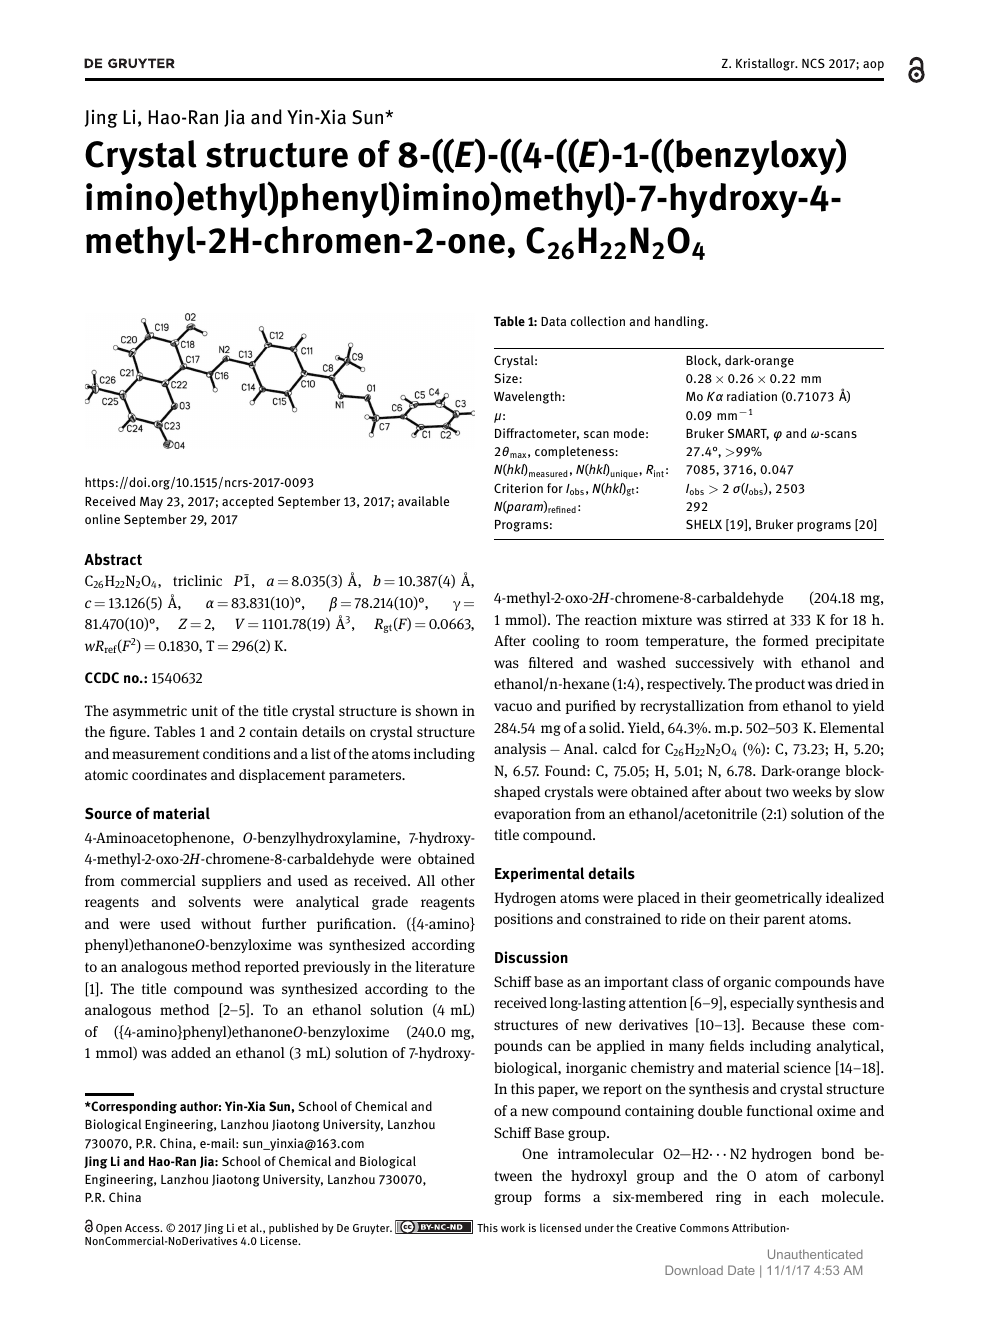 Crystal Structure Of 8 E 4 E 1 Benzyloxy Imino Ethyl Phenyl Imino Methyl 7 Hydroxy 4 Methyl 2h Chromen 2 One C26h22n2o4 Topic Of Research Paper In Chemical Sciences Download Scholarly Article Pdf And Read For Free On Cyberleninka Open